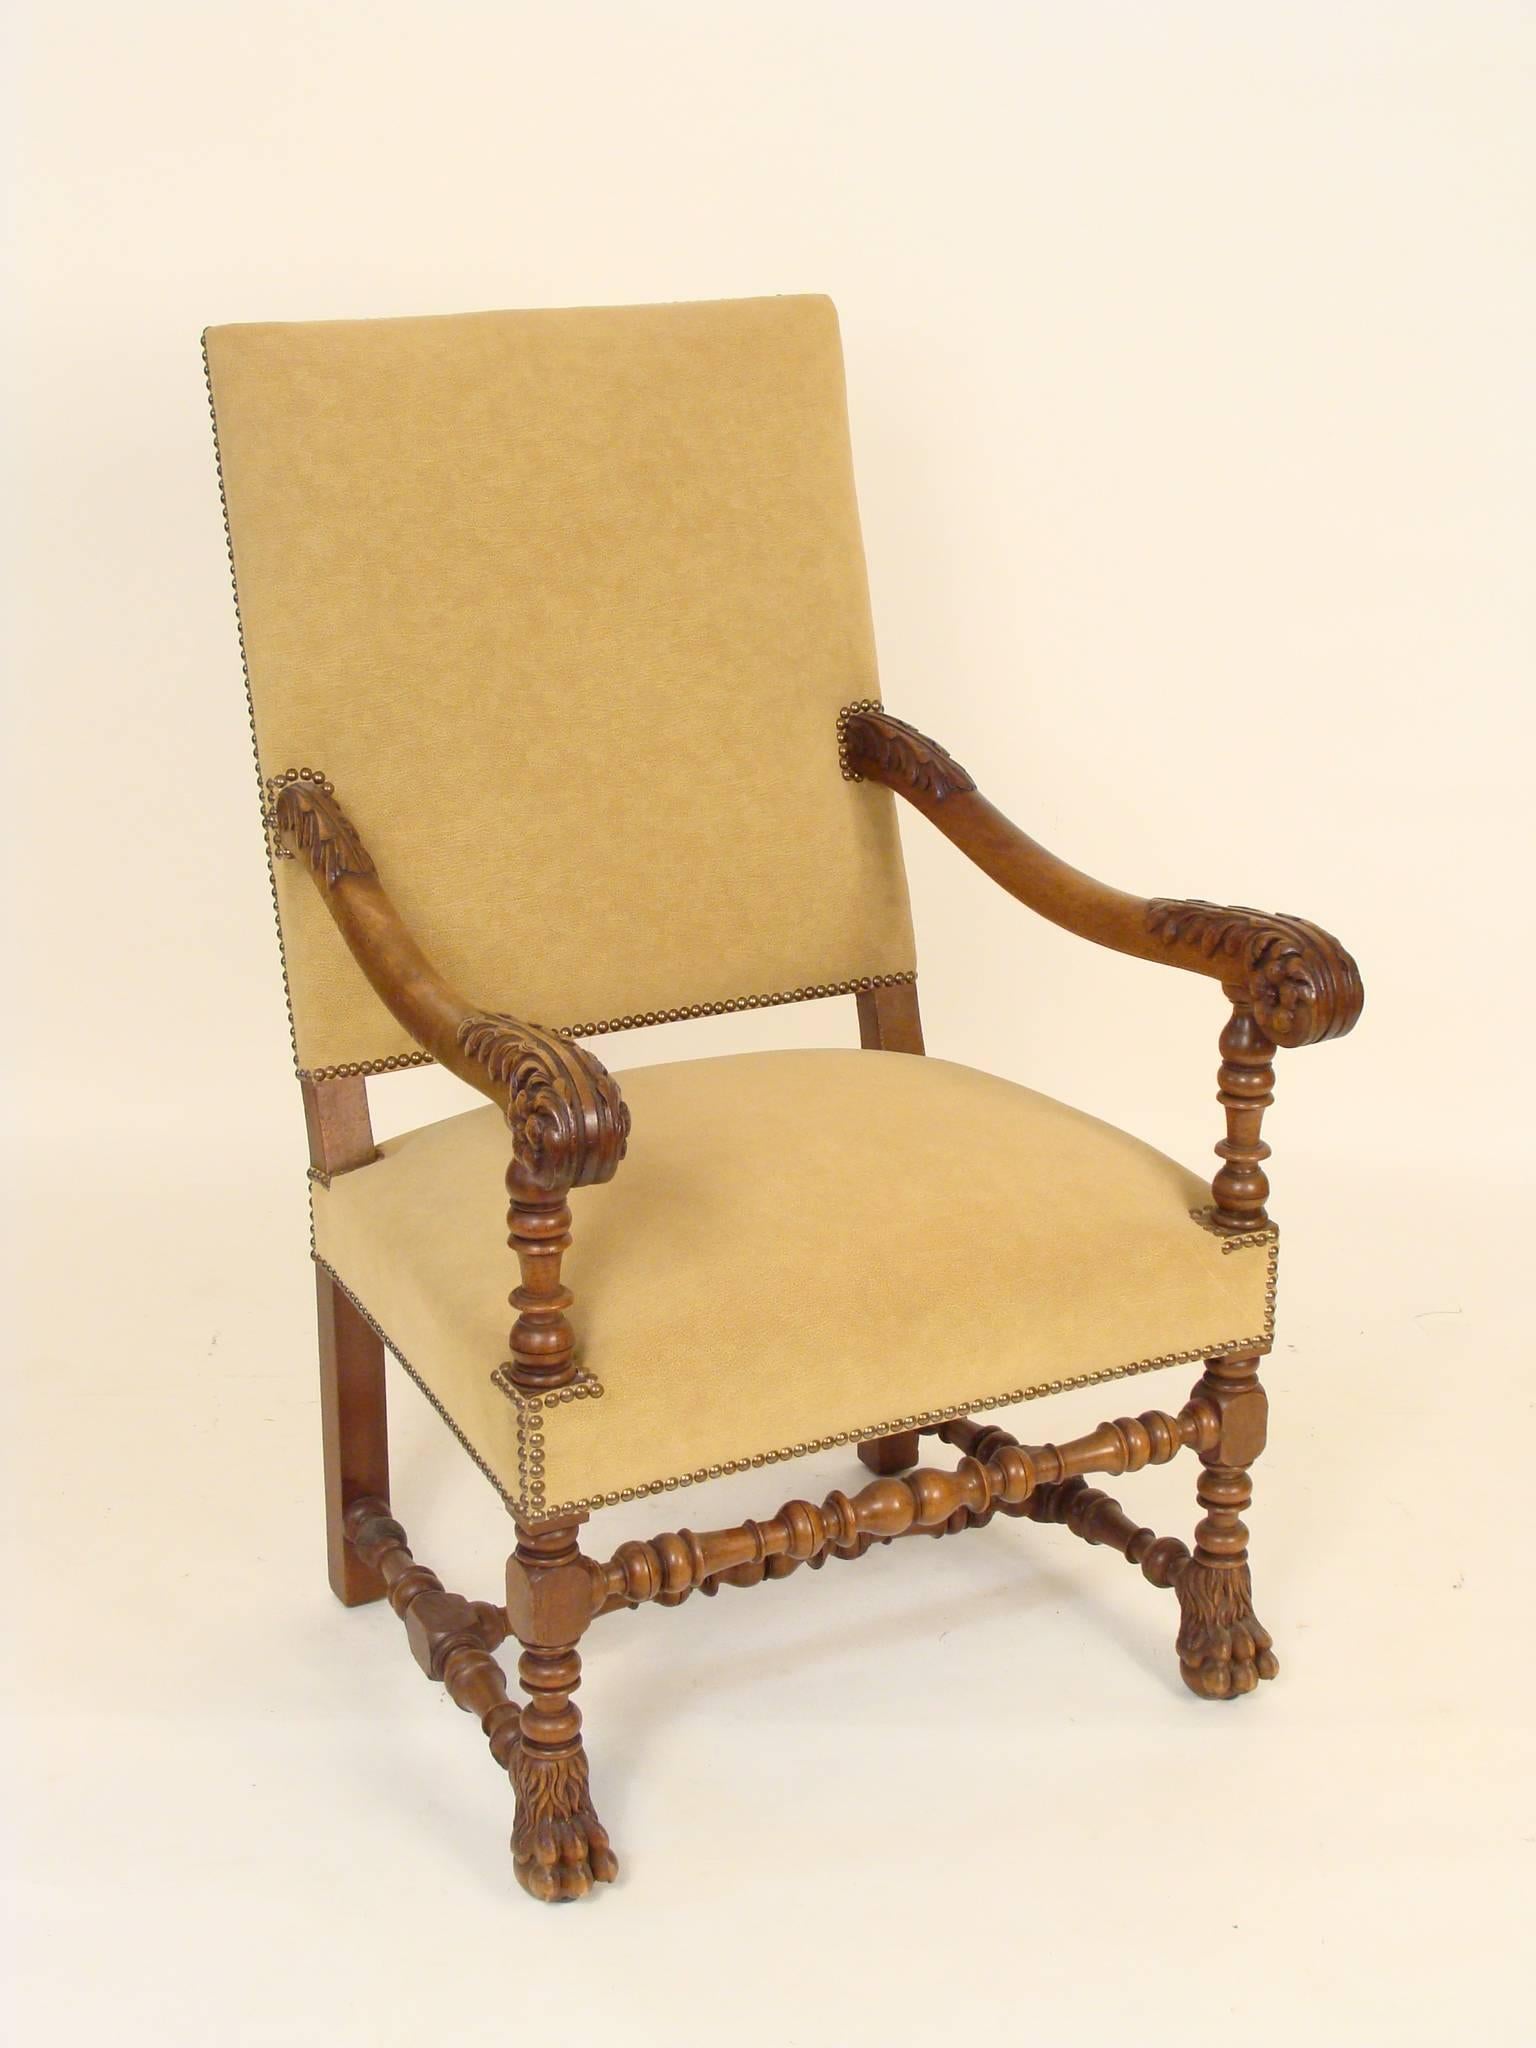 Pair of Baroque style carved walnut armchairs, circa 1900. These chairs have excellent carved walnut arms and feet. The upholstery is new and in excellent condition.